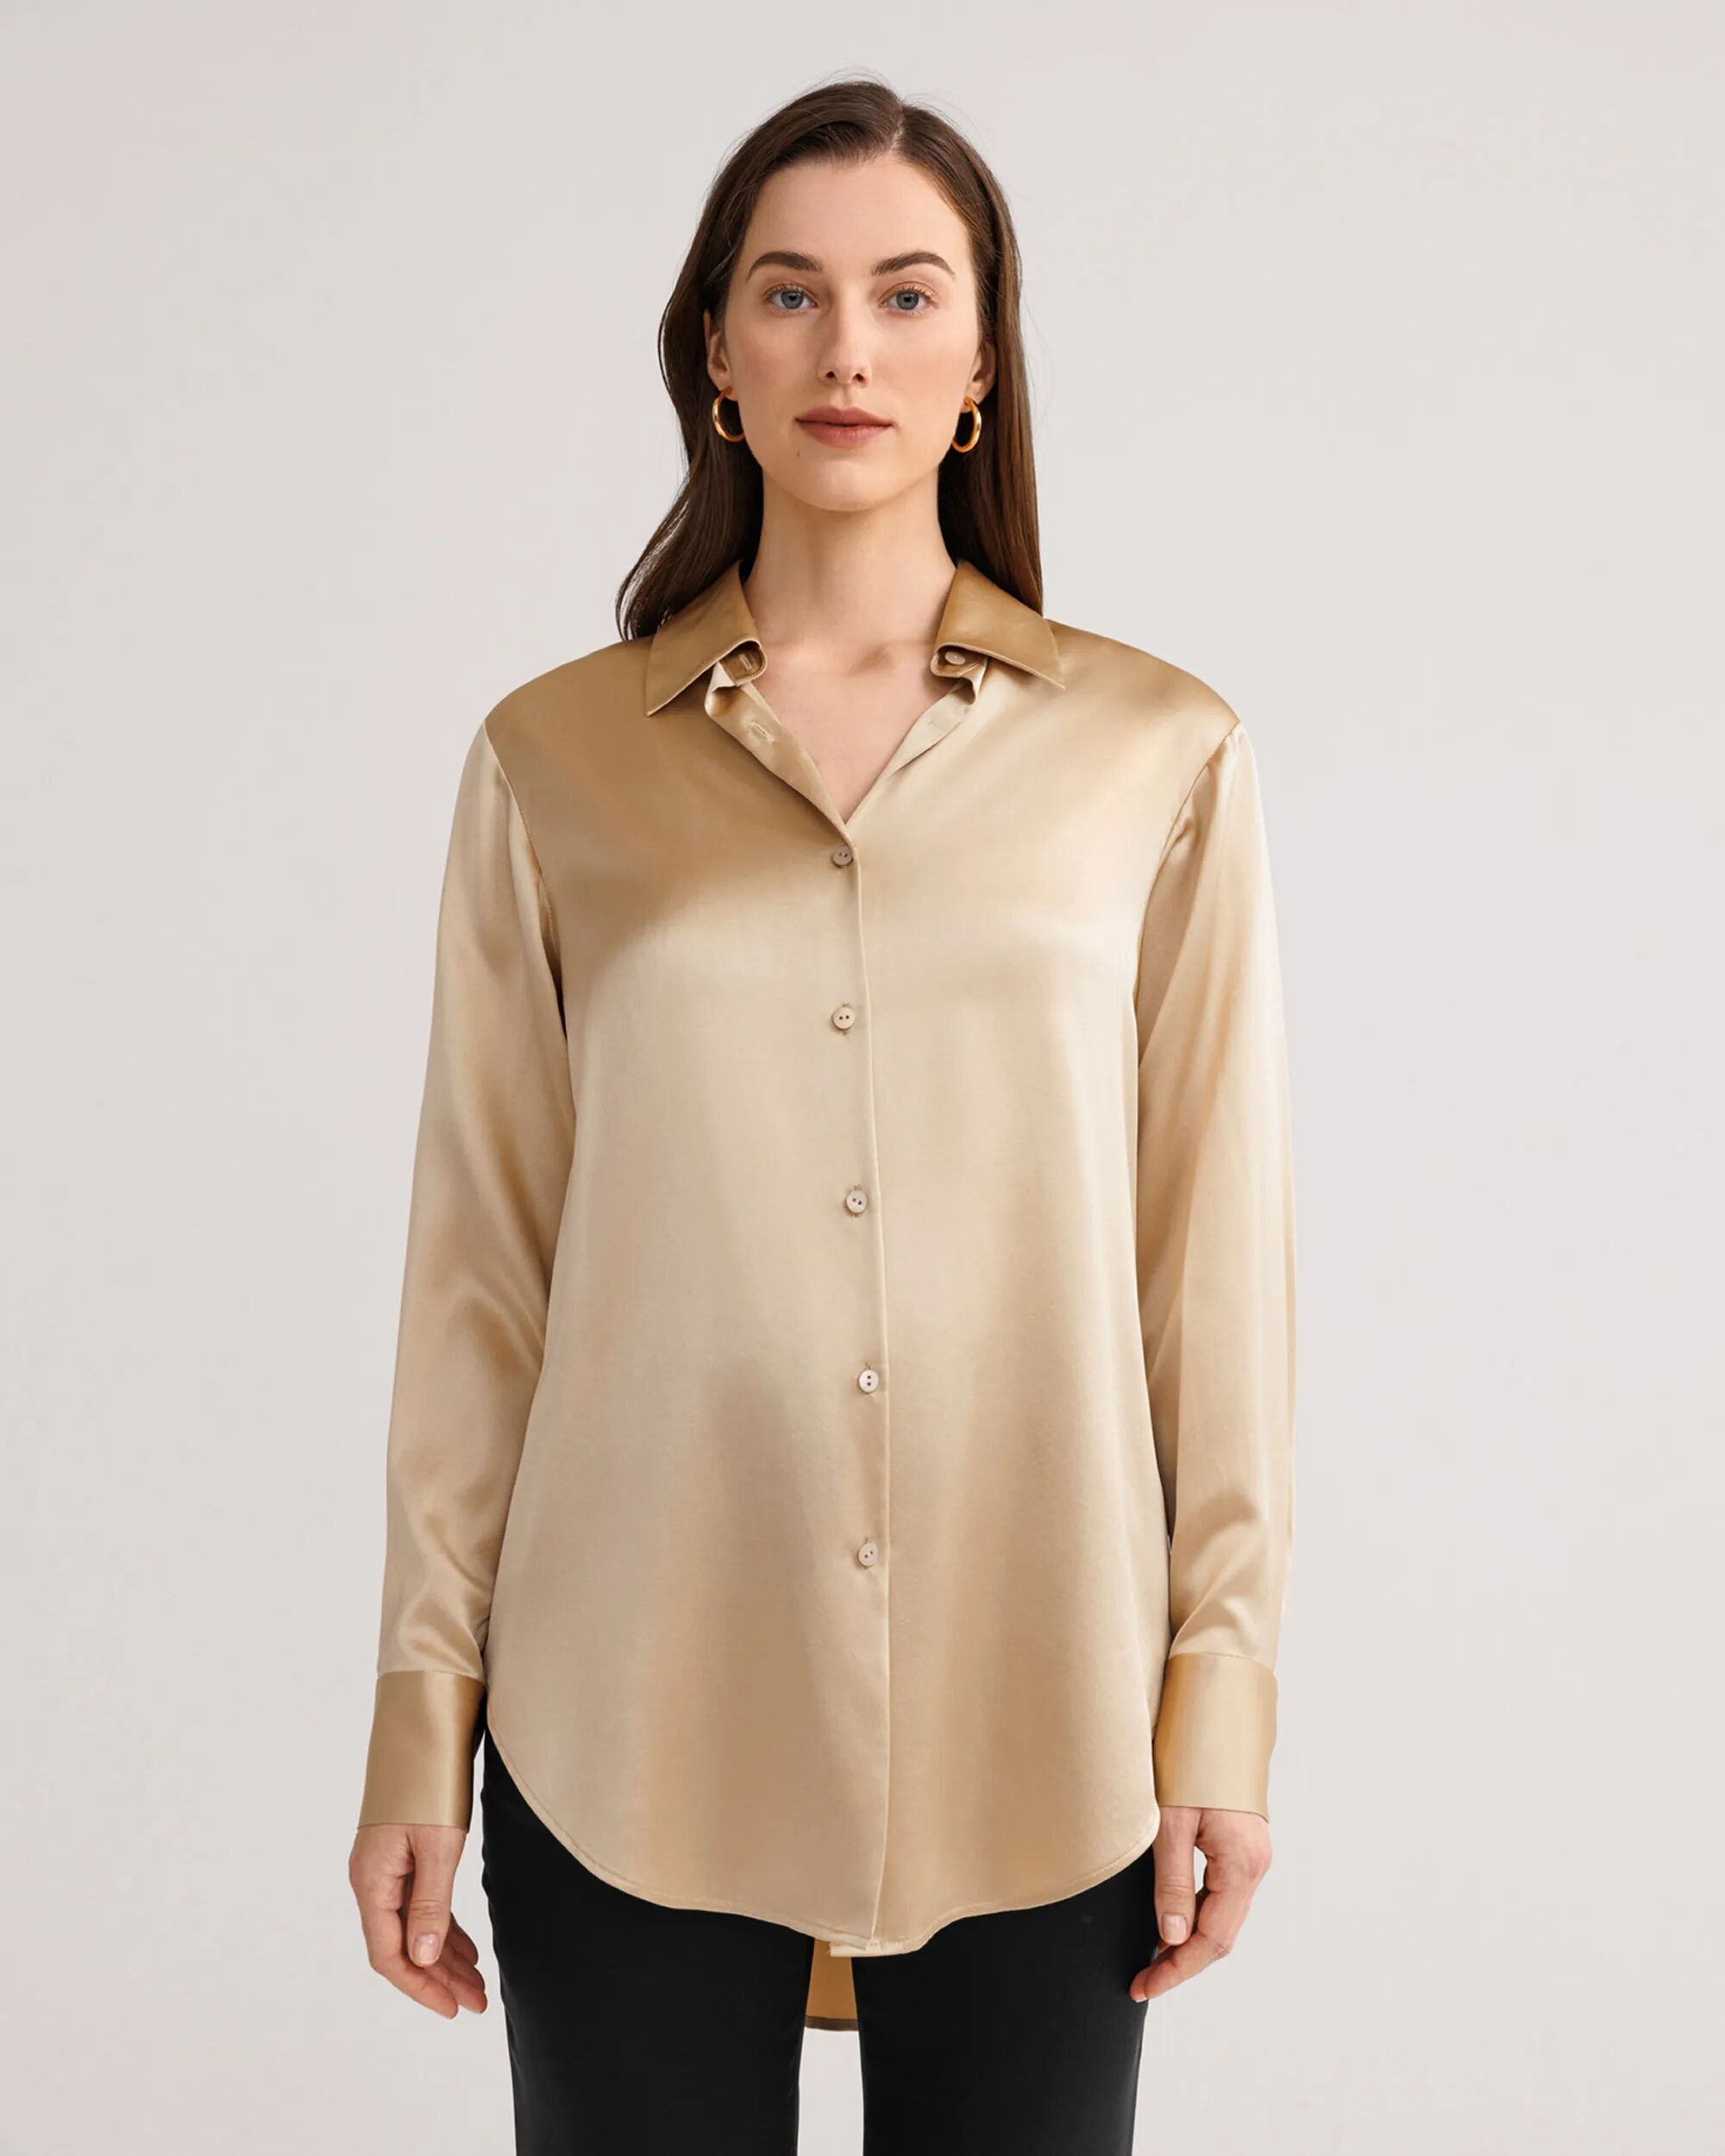 LILYSILK Business Gold Silk Shirt   Striped   100 Silk Women Oversized Style Skin-Friendly And Breathable Light Camel S